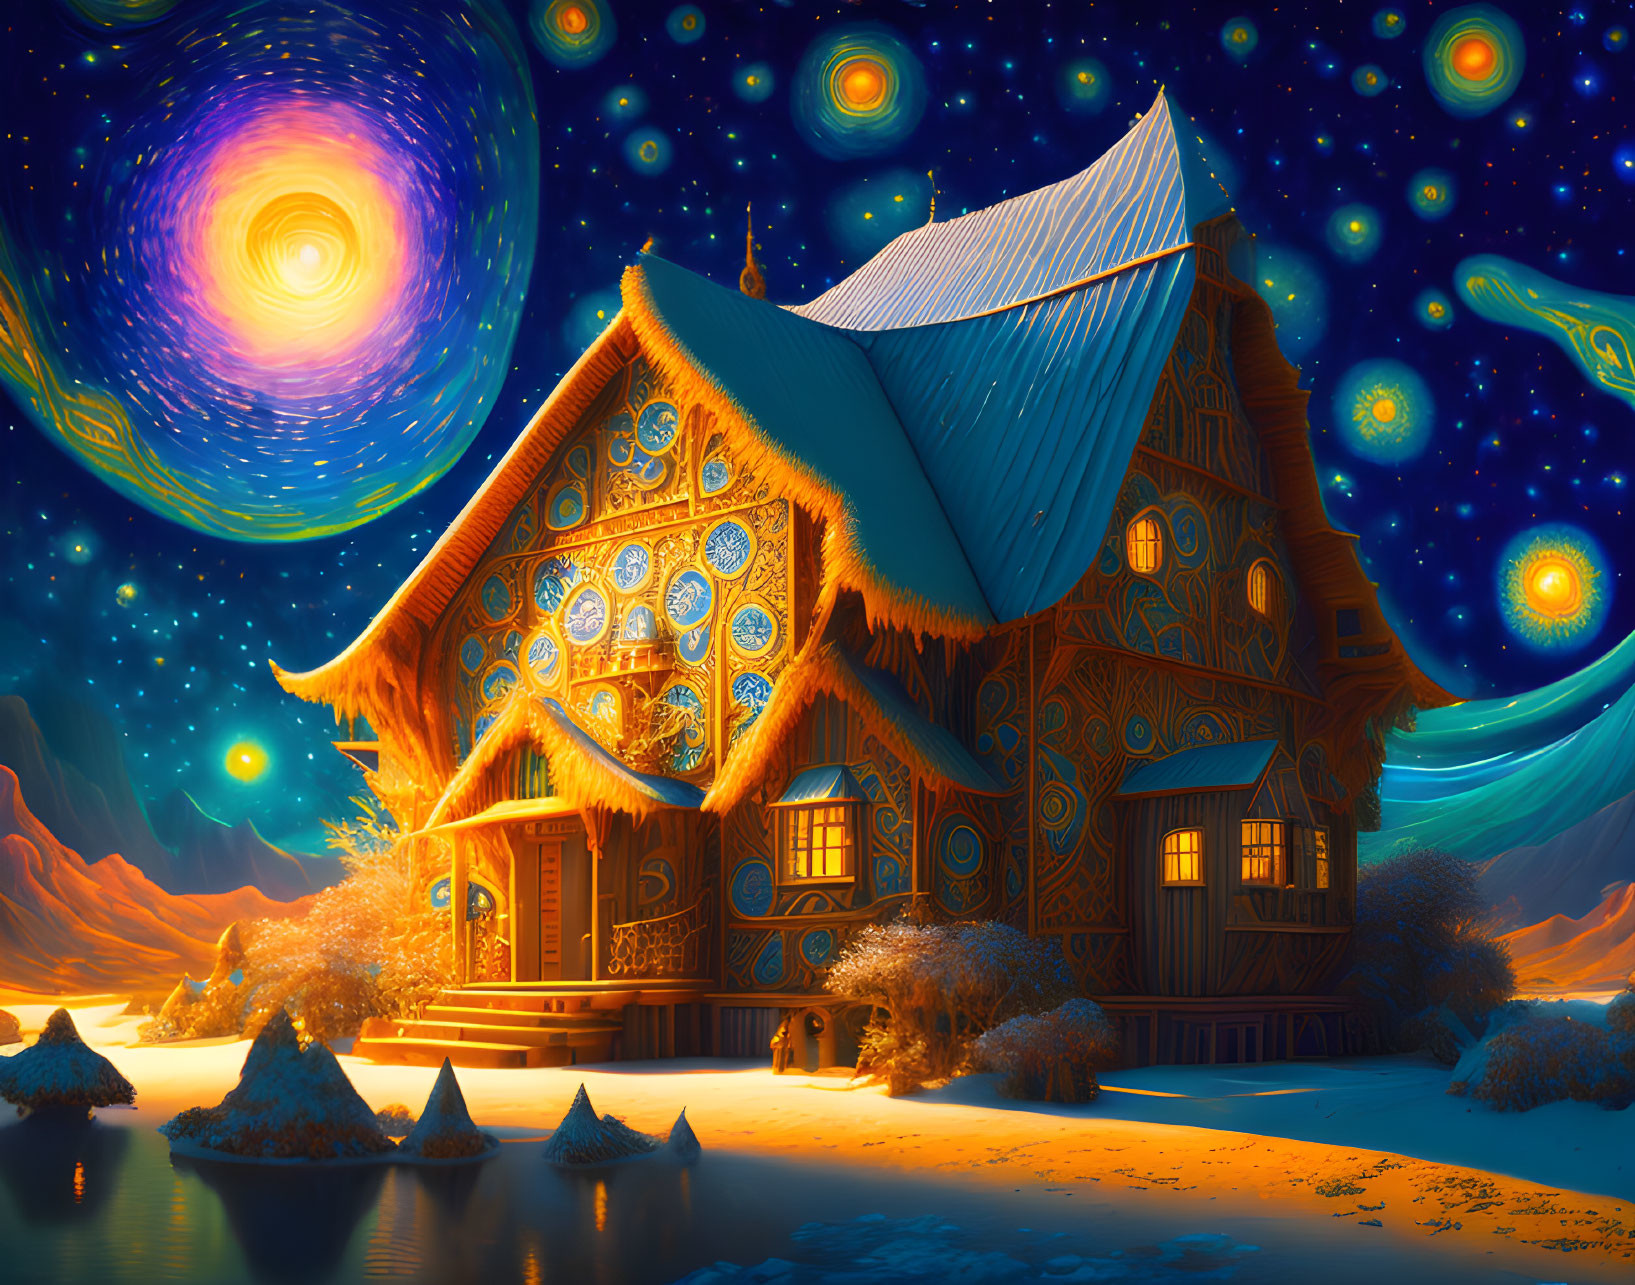 Whimsical cottage with intricate designs under swirling night sky